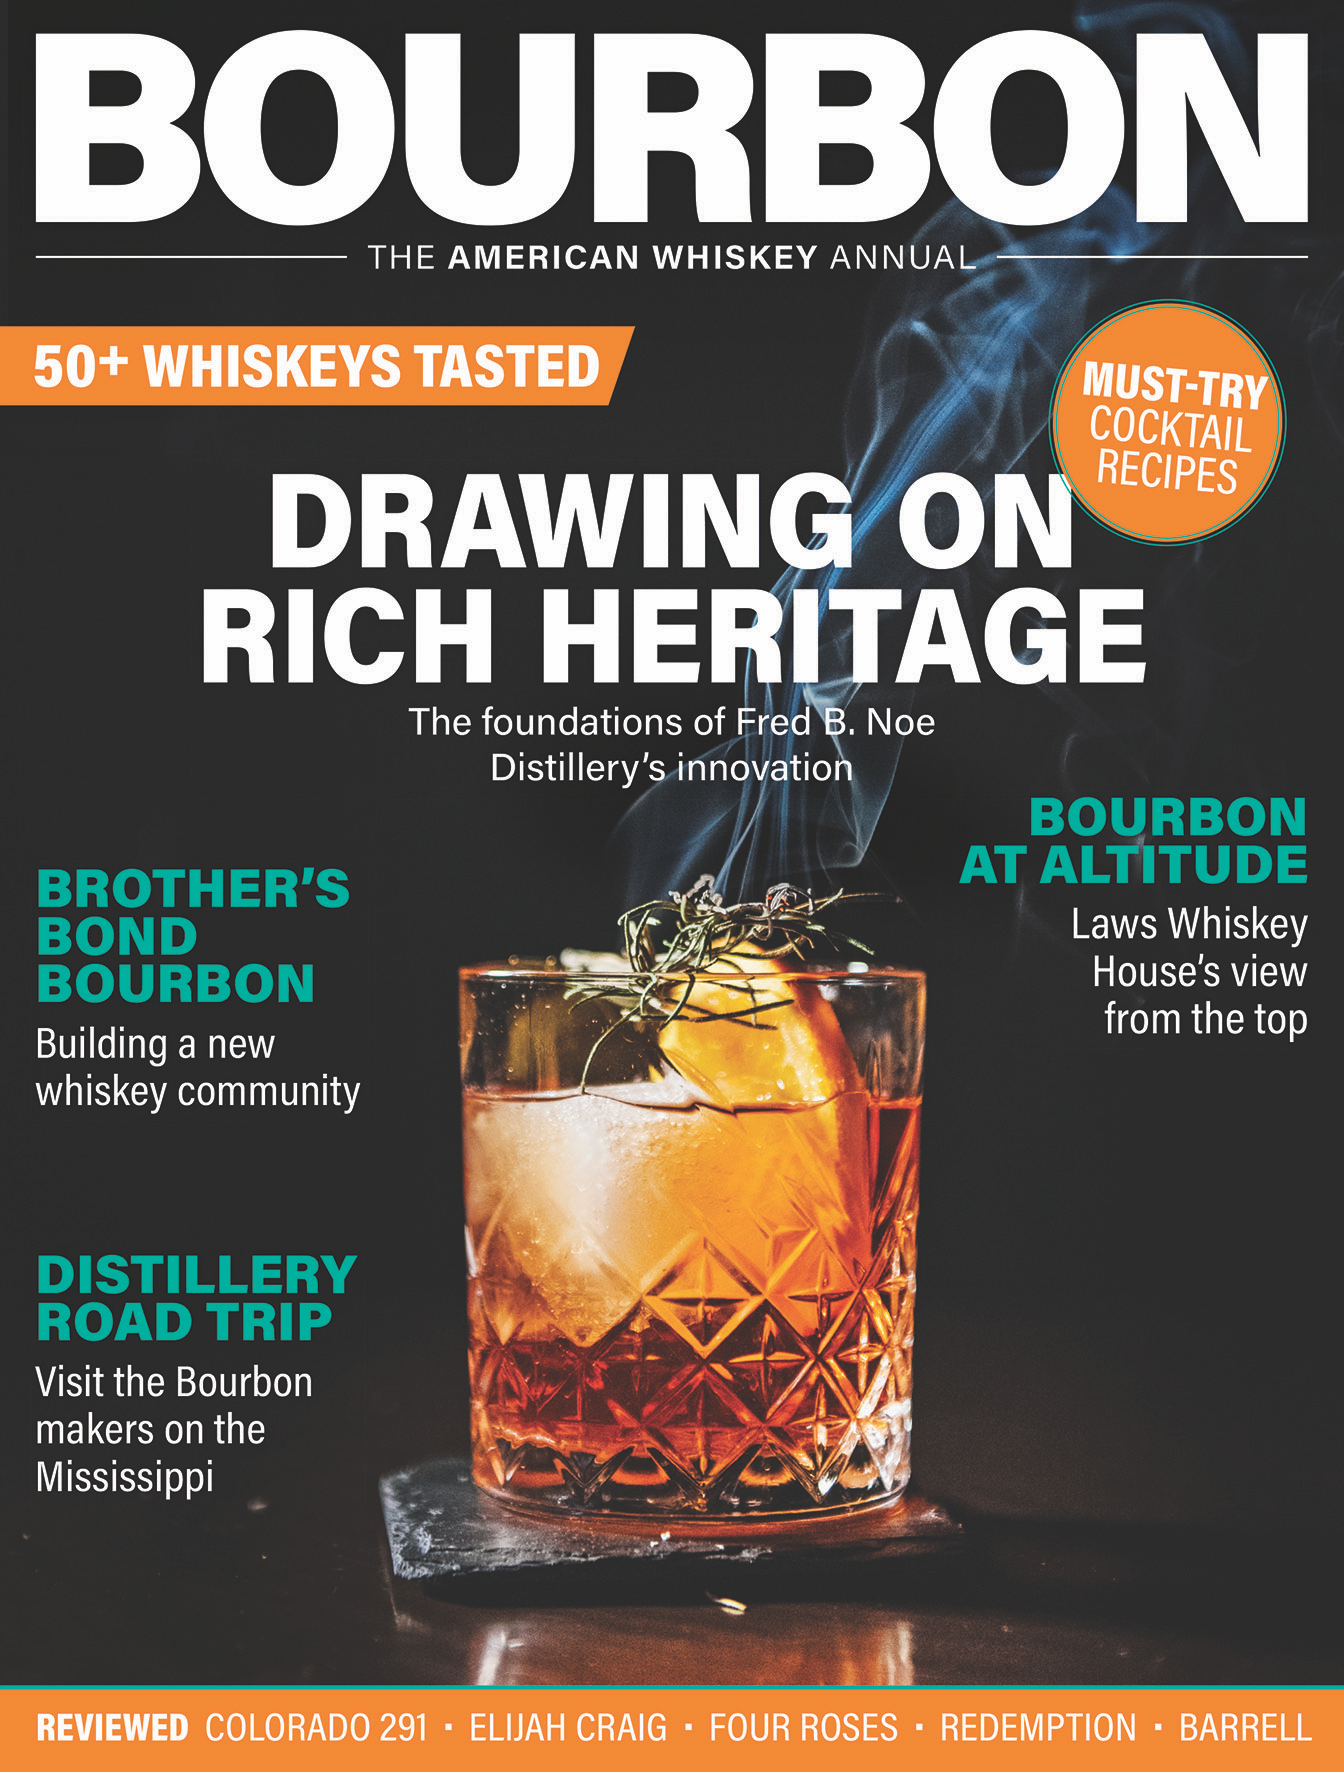 BOURBON - The American Whiskey Annual